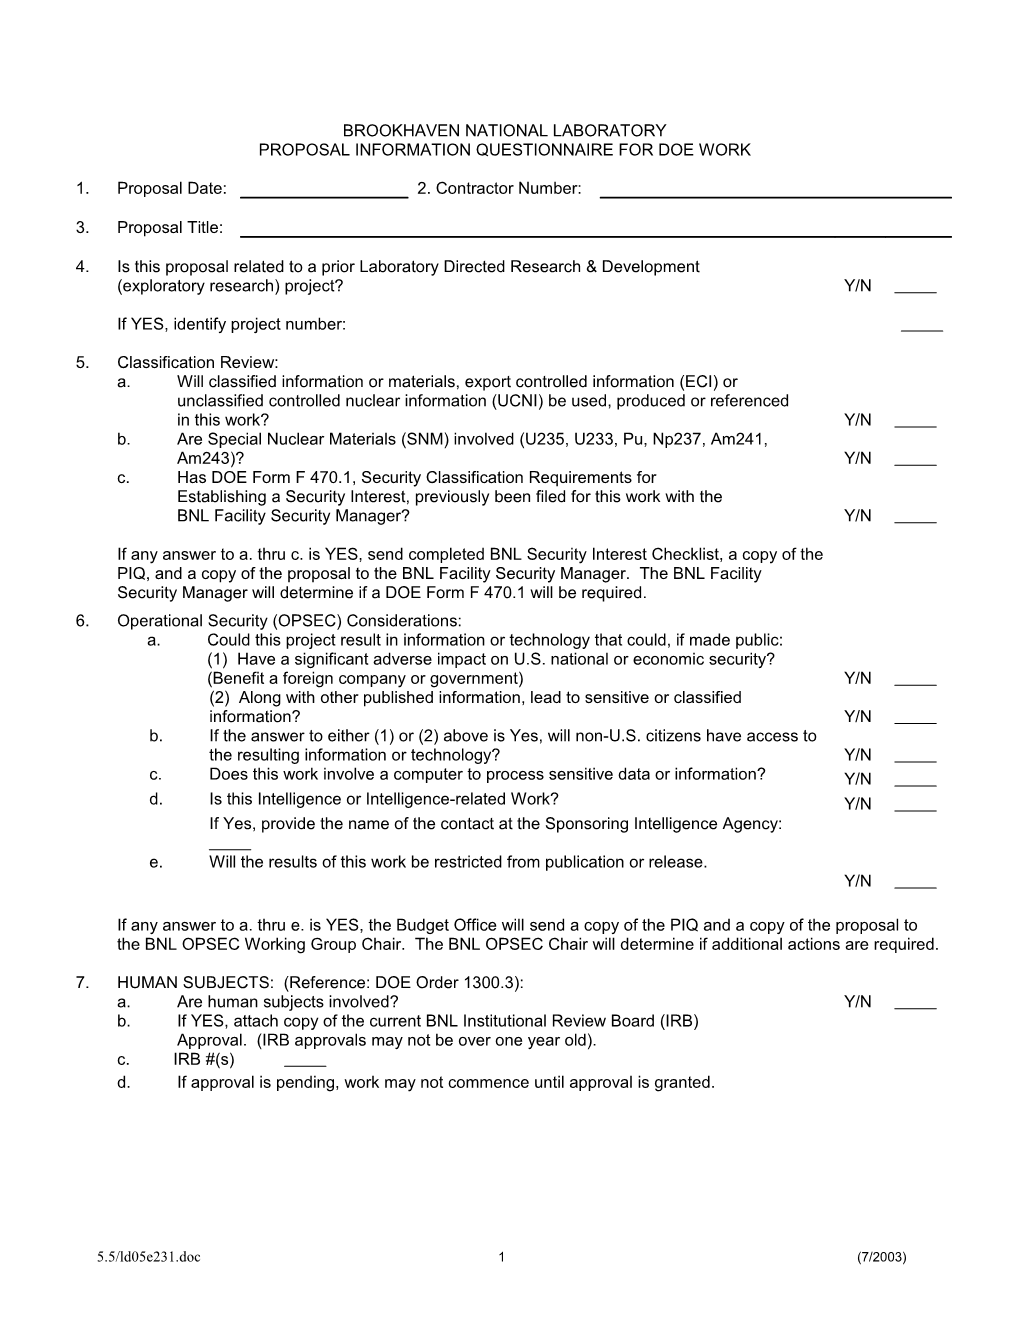 Proposal Information Questionnaire for Doe Work